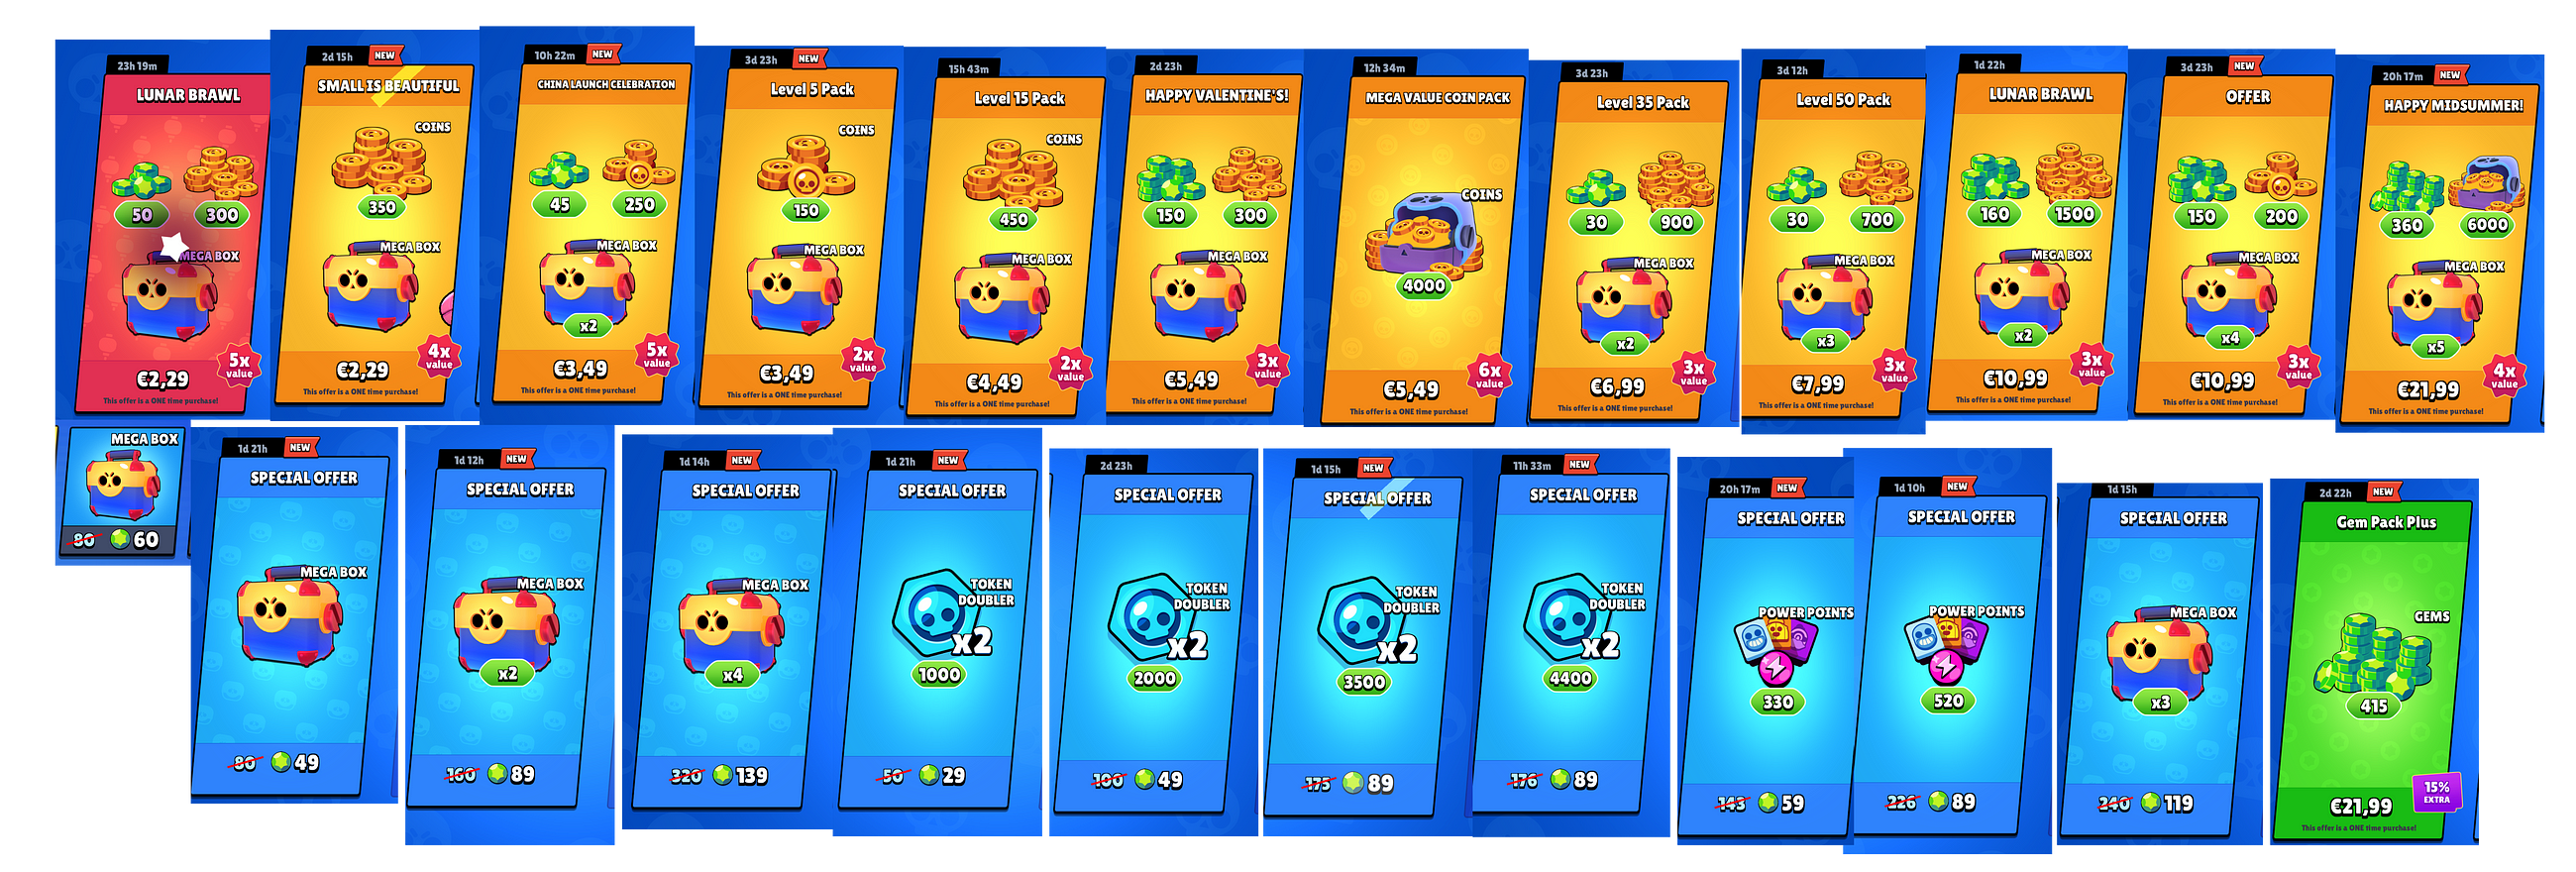 2ndpotion Level Up 3 - daily deals brawl stars